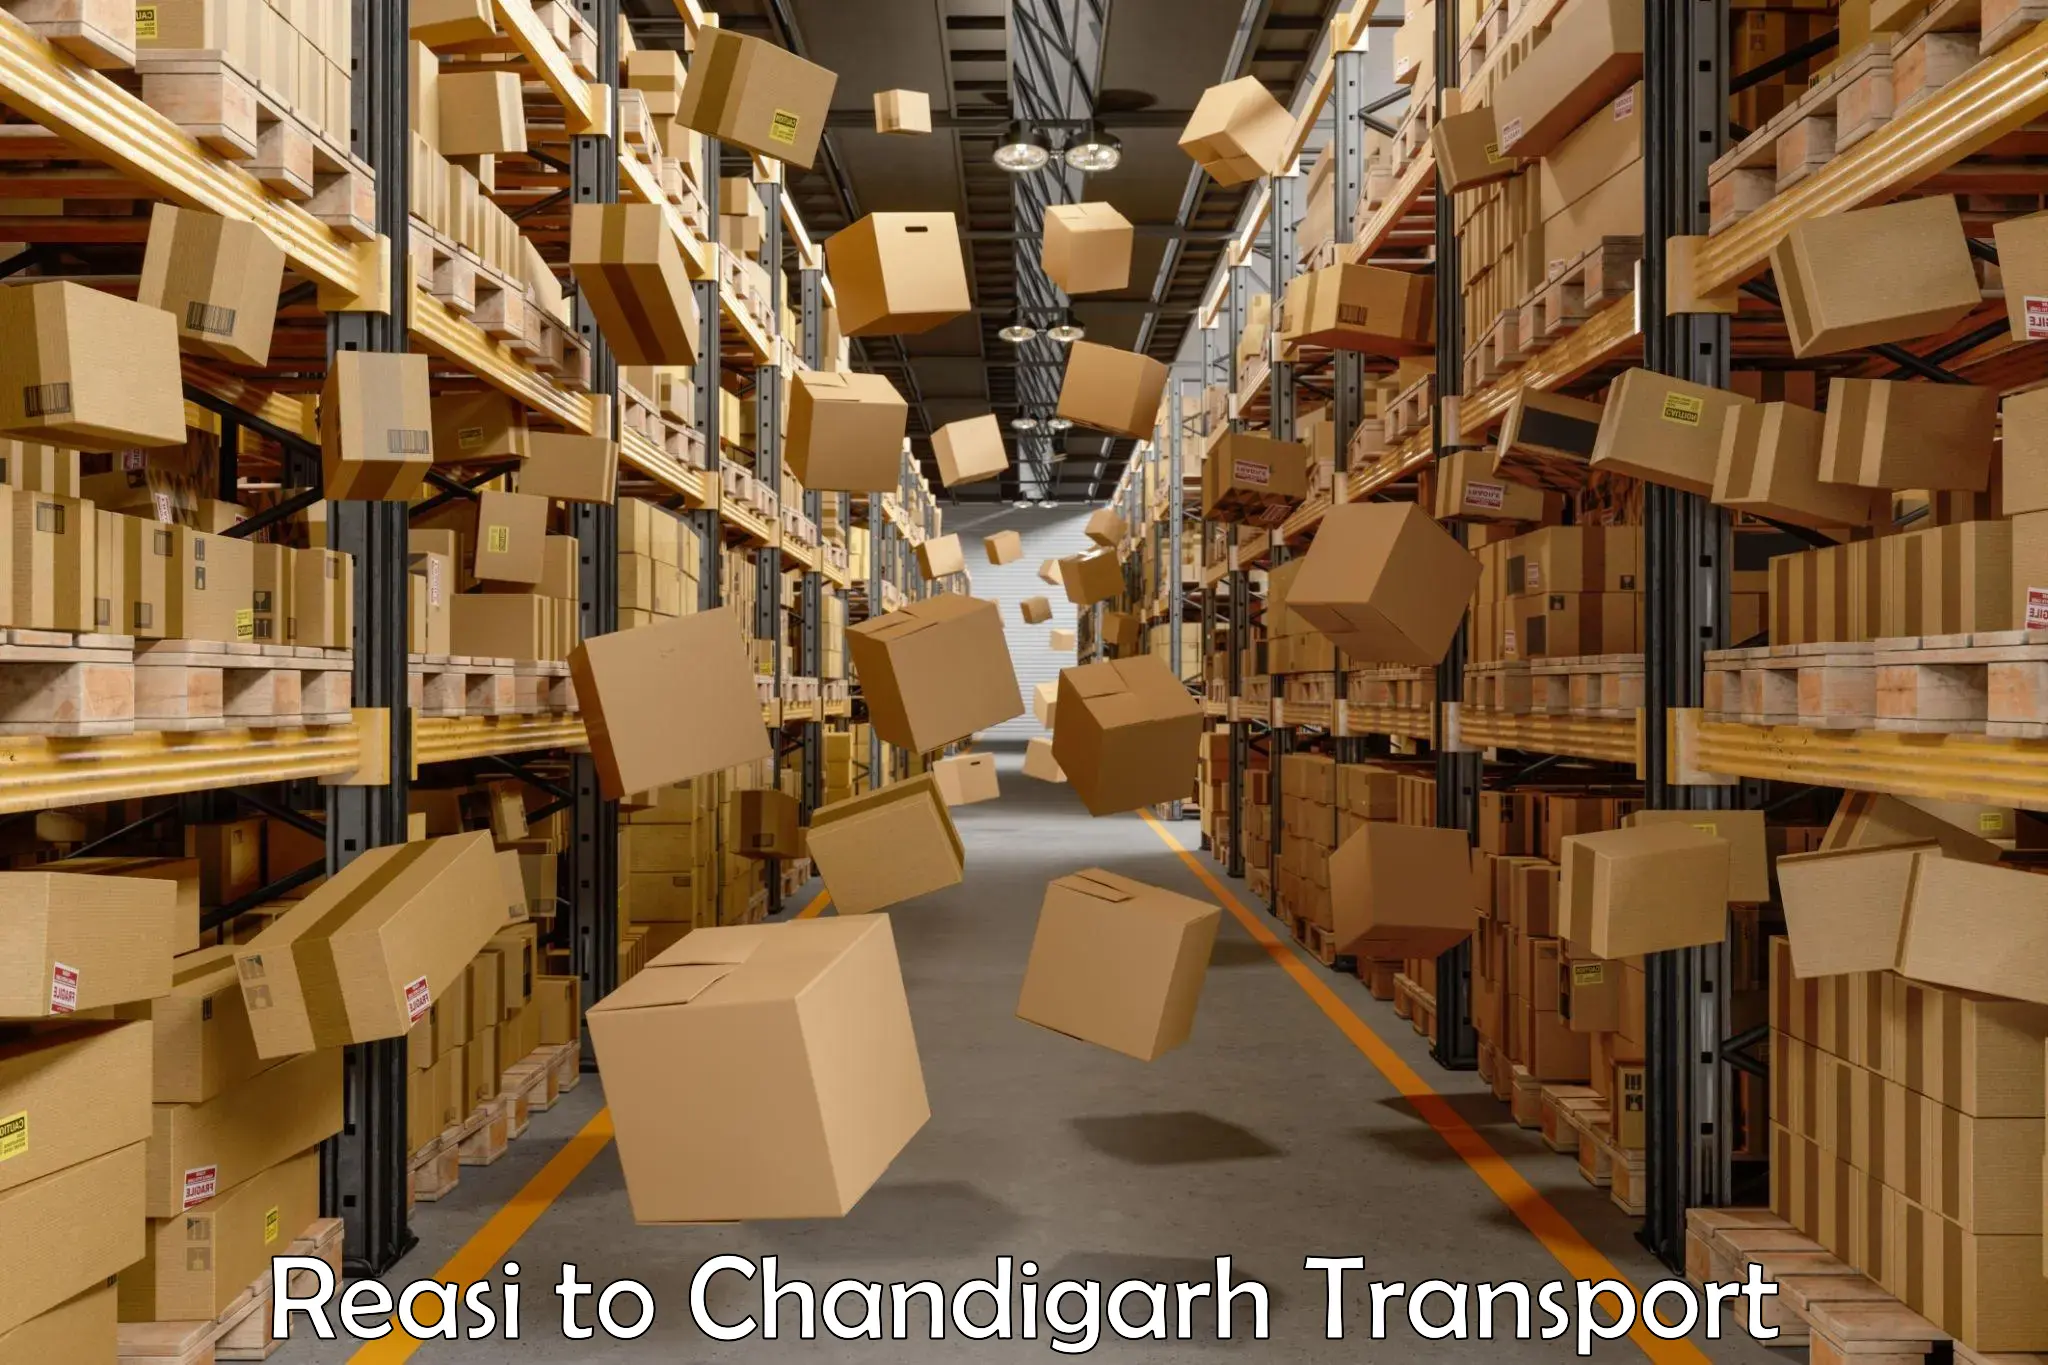 Parcel transport services Reasi to Chandigarh